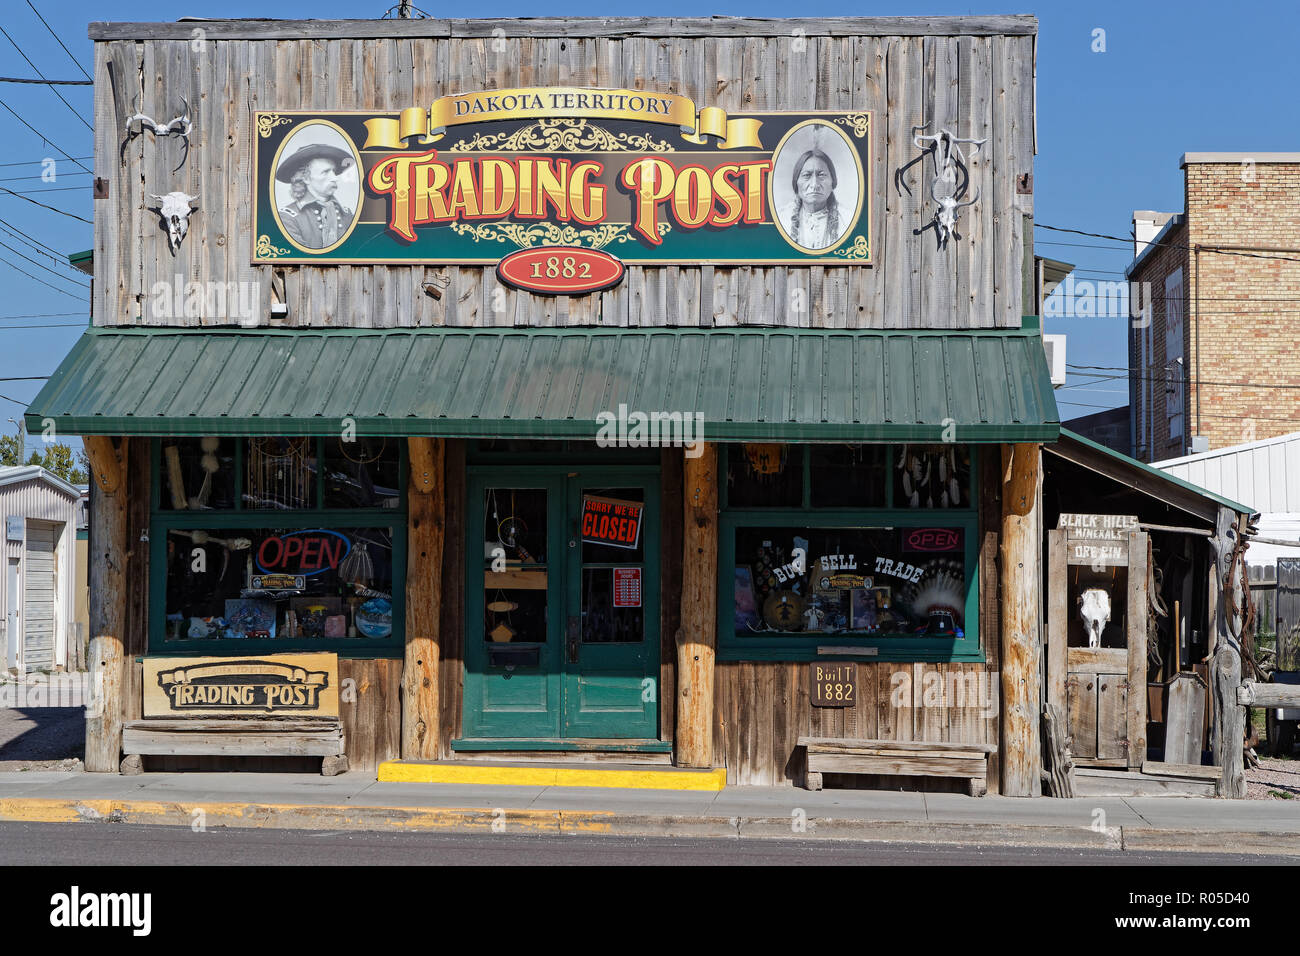 CUSTER, SOUTH DAKOTA, September 16, 2018 : The old Trading Post in Custer. A trading post was an establishment where the trading of goods took place i Stock Photo